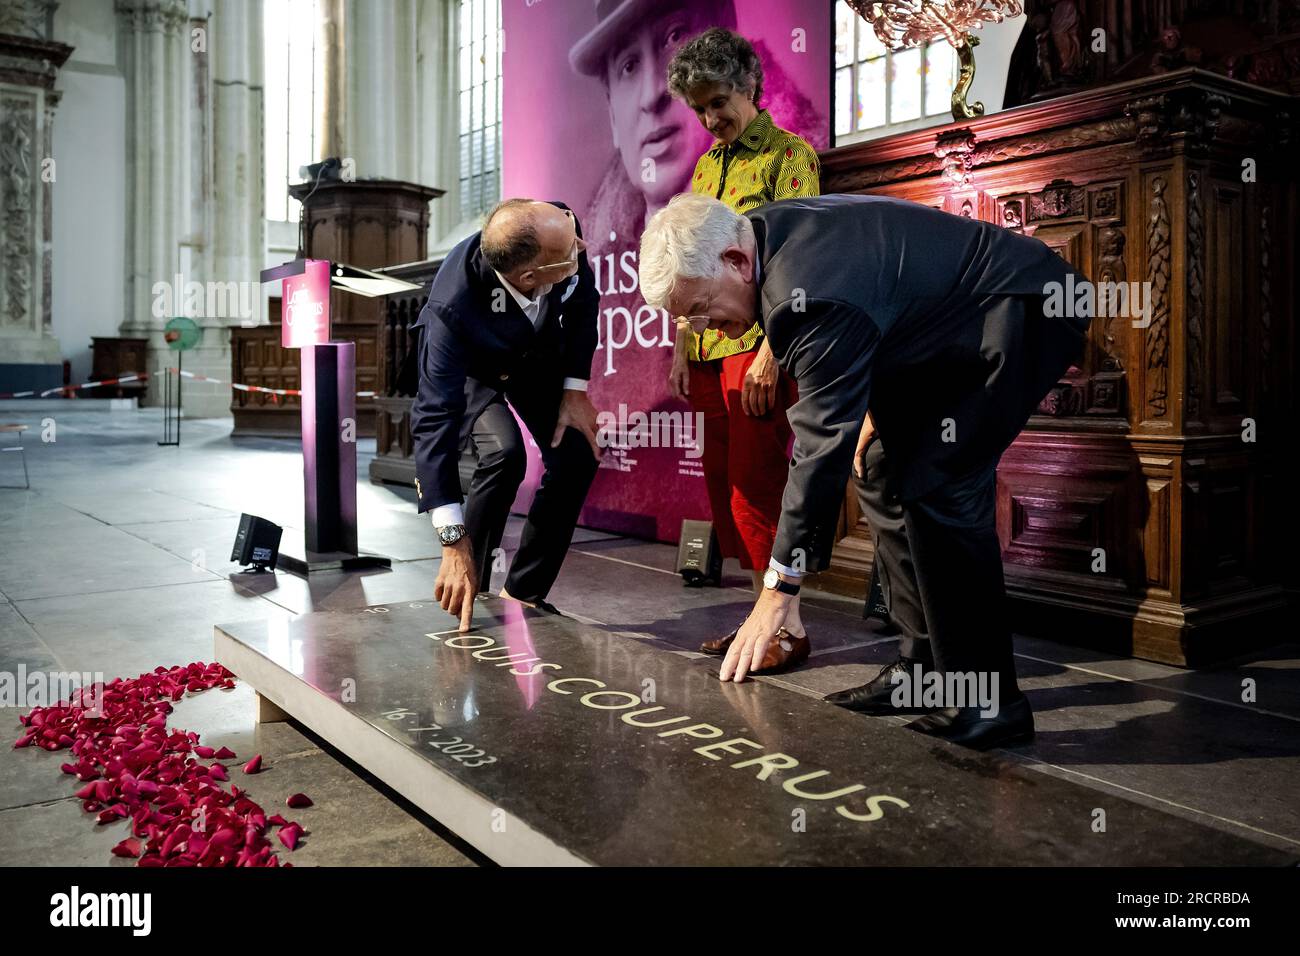 AMSTERDAM - Mayor Jan van Zanen (r) of The Hague unveils the memorial stone for Louis Couperus in the Nieuwe Kerk. The Dutch writer was commemorated on his 100th anniversary. ANP ROBIN VAN LONKHUIJSEN netherlands out - belgium out Stock Photo